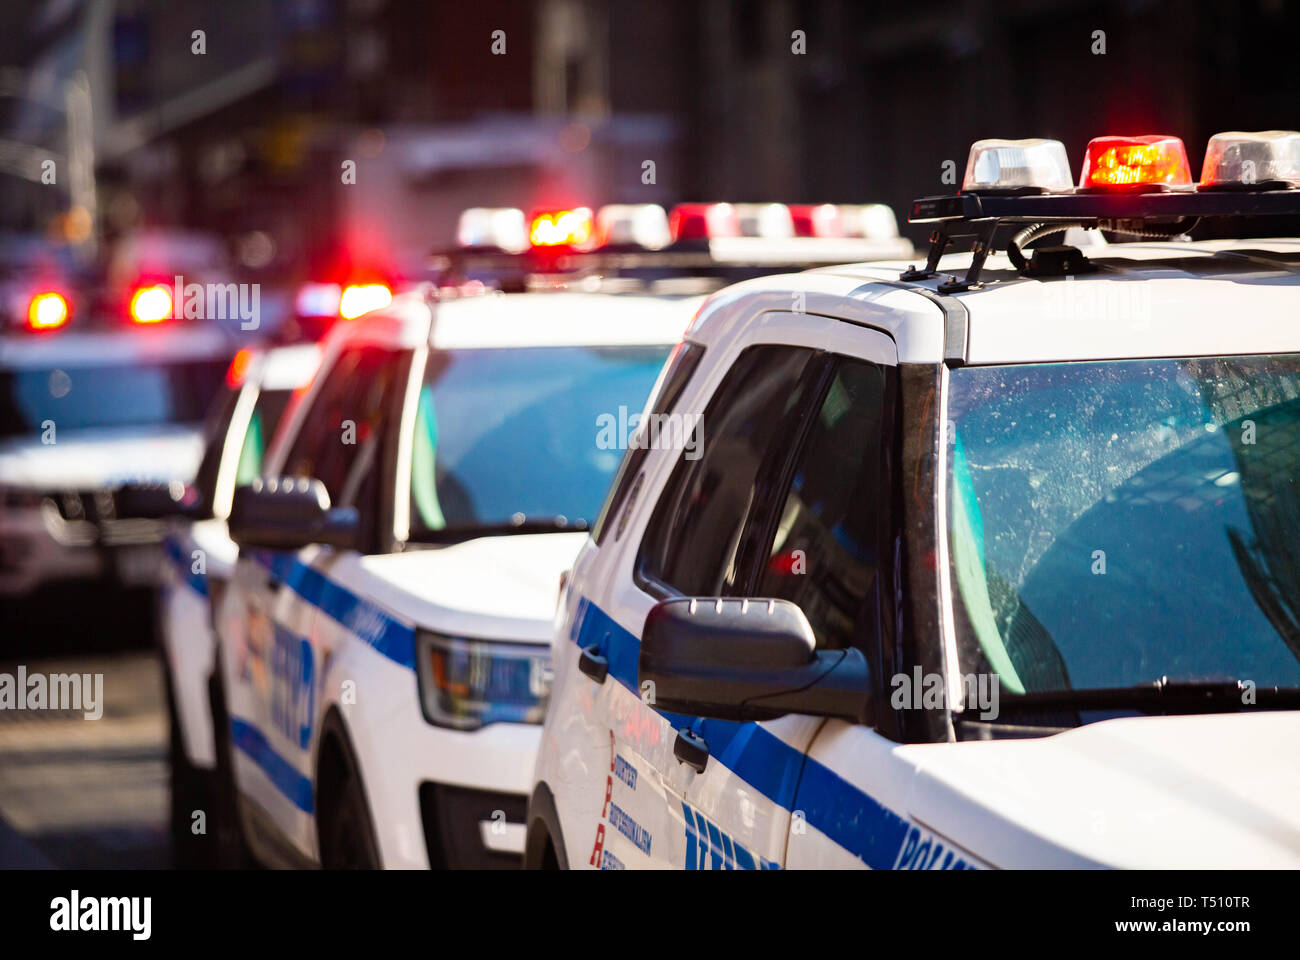 New York NYPD Police car with sirens at day on street Stock Photo